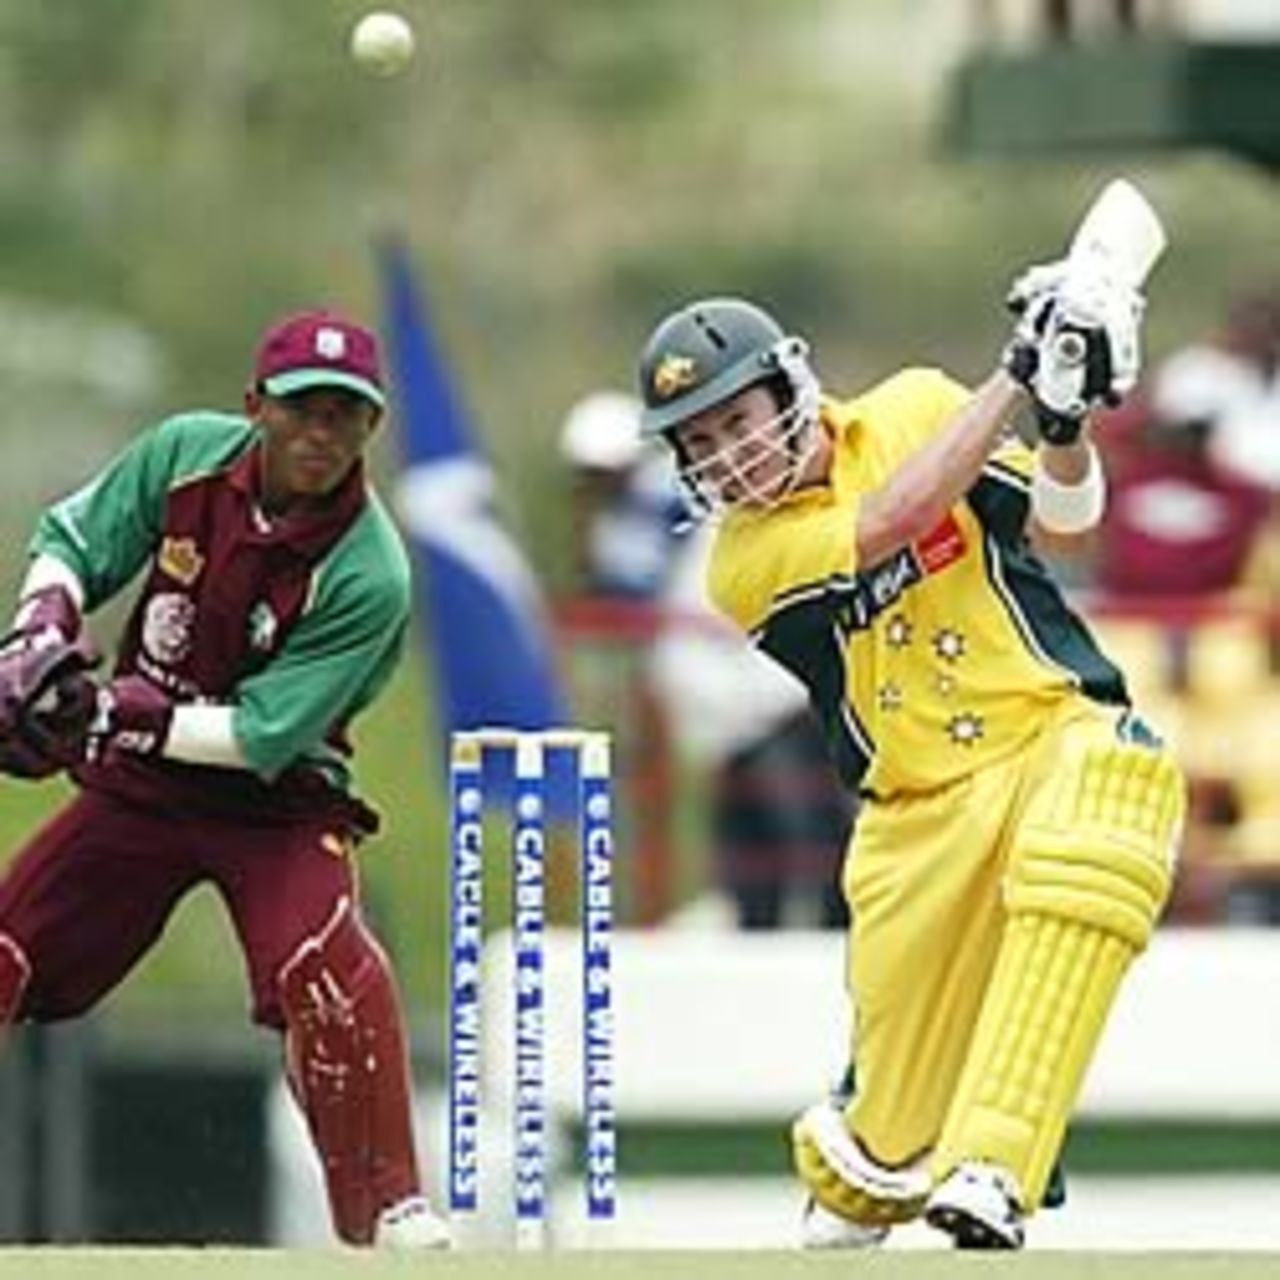 CASTRIES, ST. LUCIA - MAY 21: Michael Clarke of Australia in action during the third one day international between the West Indies and Australia played at the National Cricket Ground on May 21, 2003 in Castries, St Lucia.